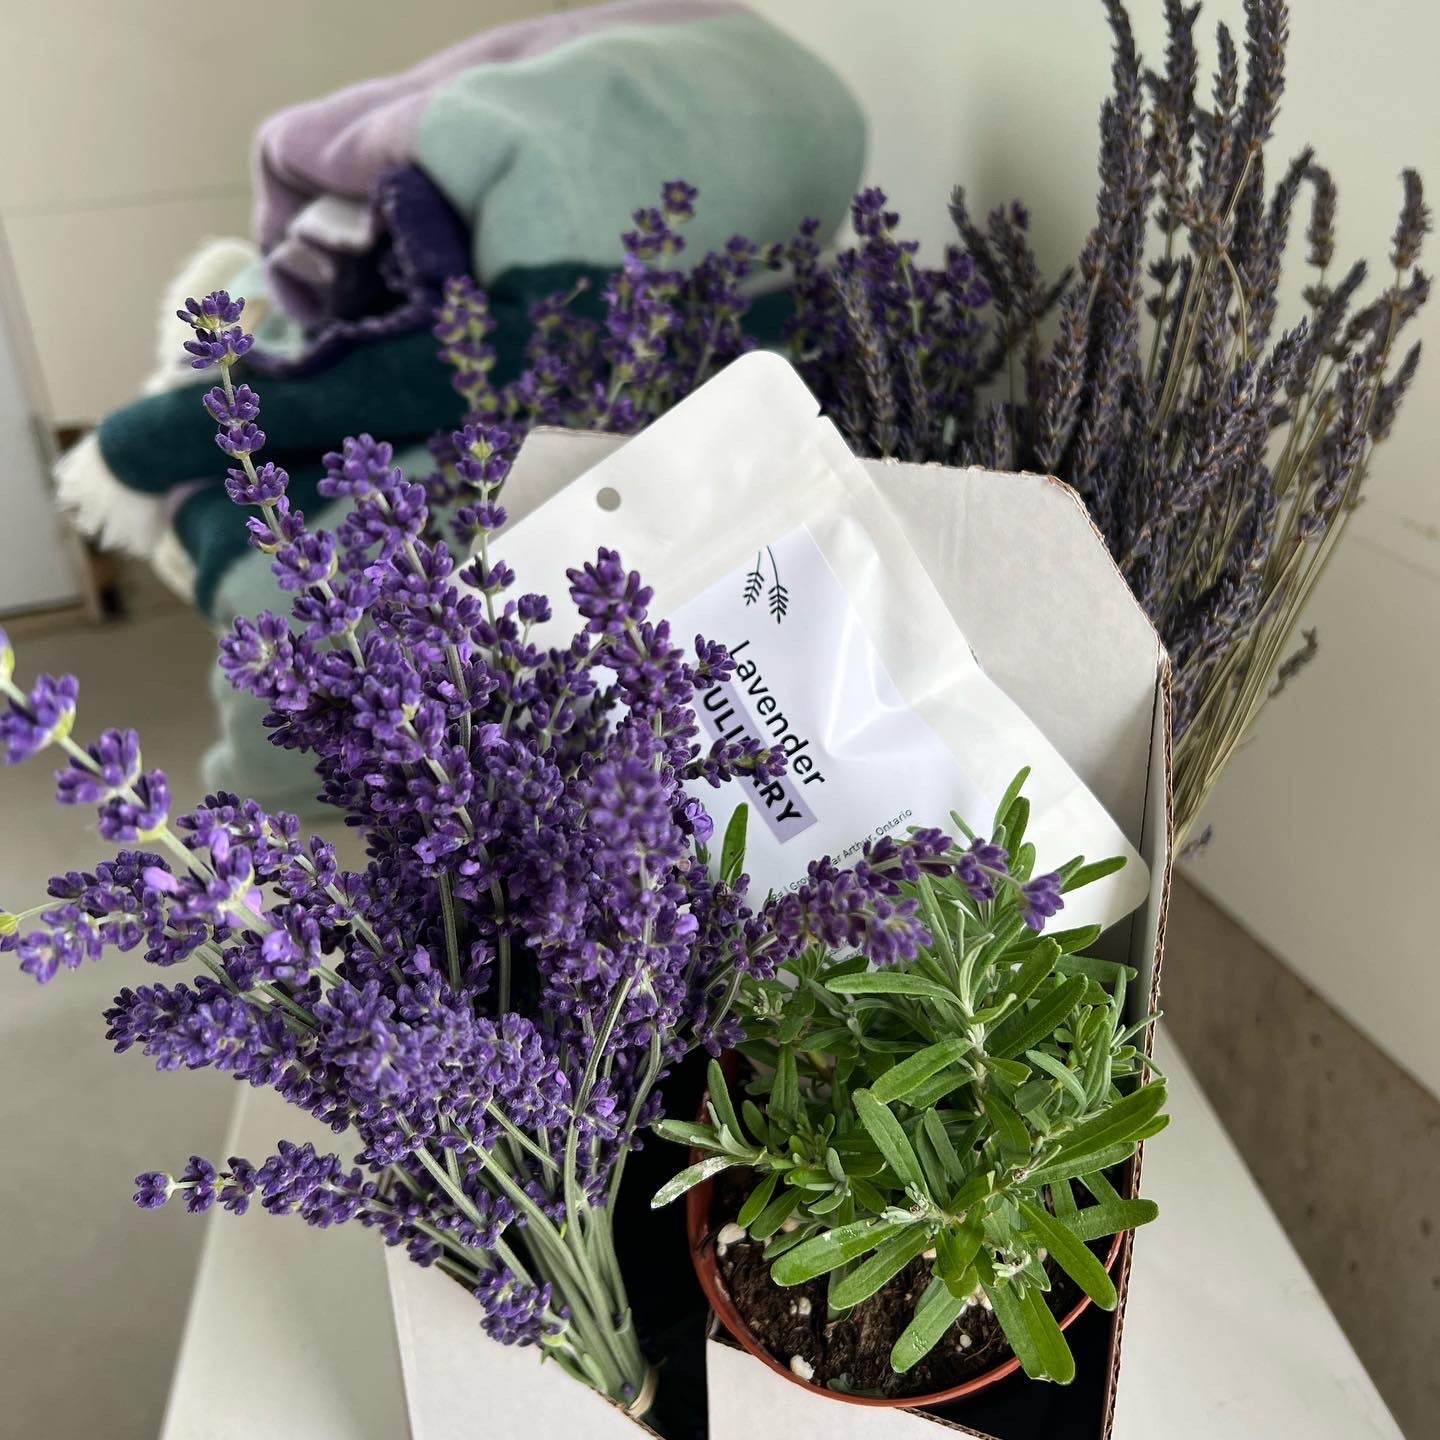 White box full of freshly cut purple lavender, dried lavender bunches, a green plant and a white package that says “Culinary Lavender”.